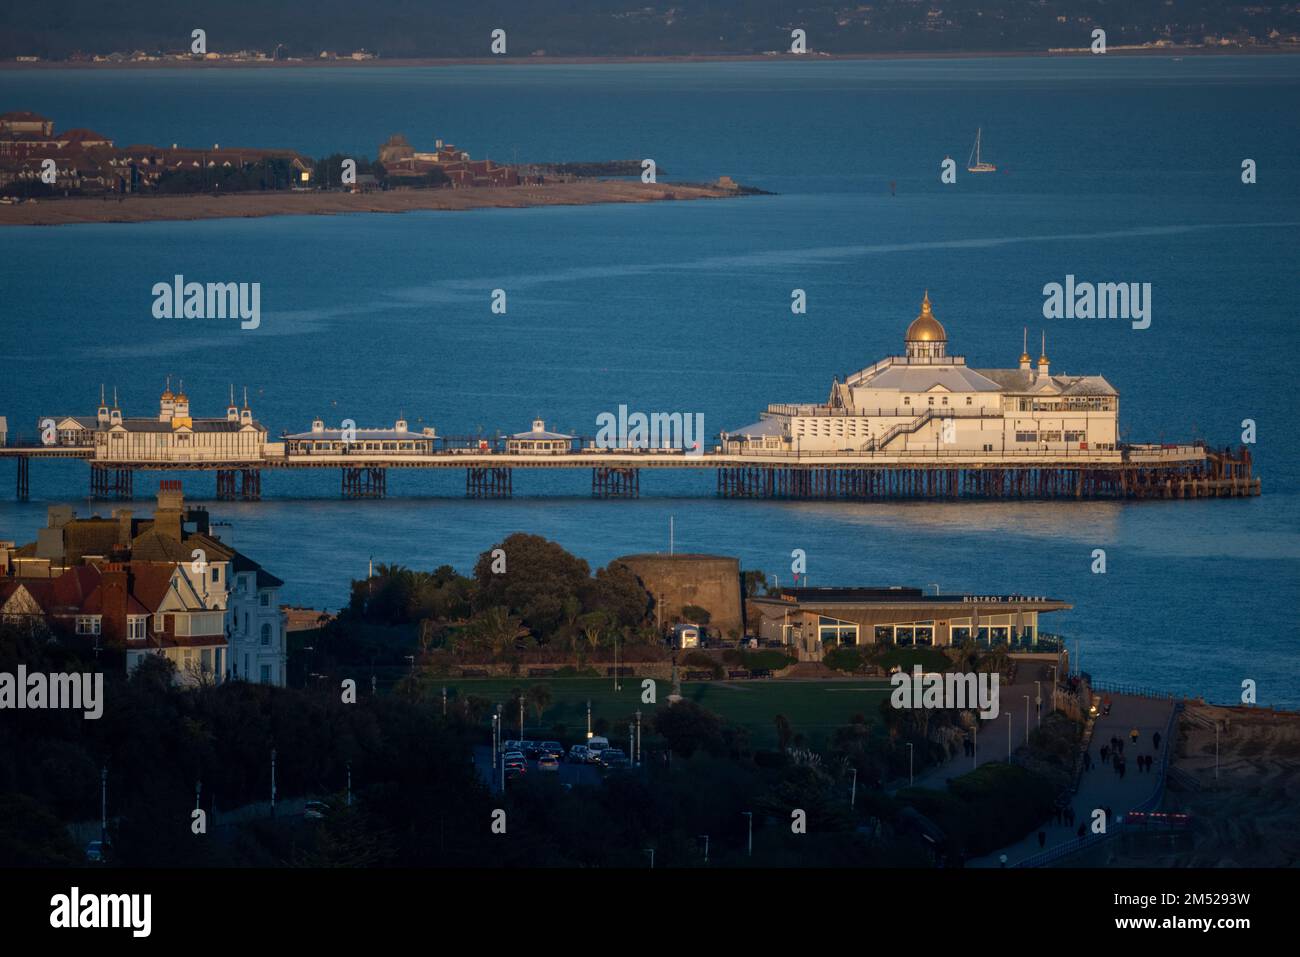 Eastbourne Pier, in the county of East Sussex on the south coast of England, UK. Photographed from the South Downs, near Beachy Head, looking east. Stock Photo